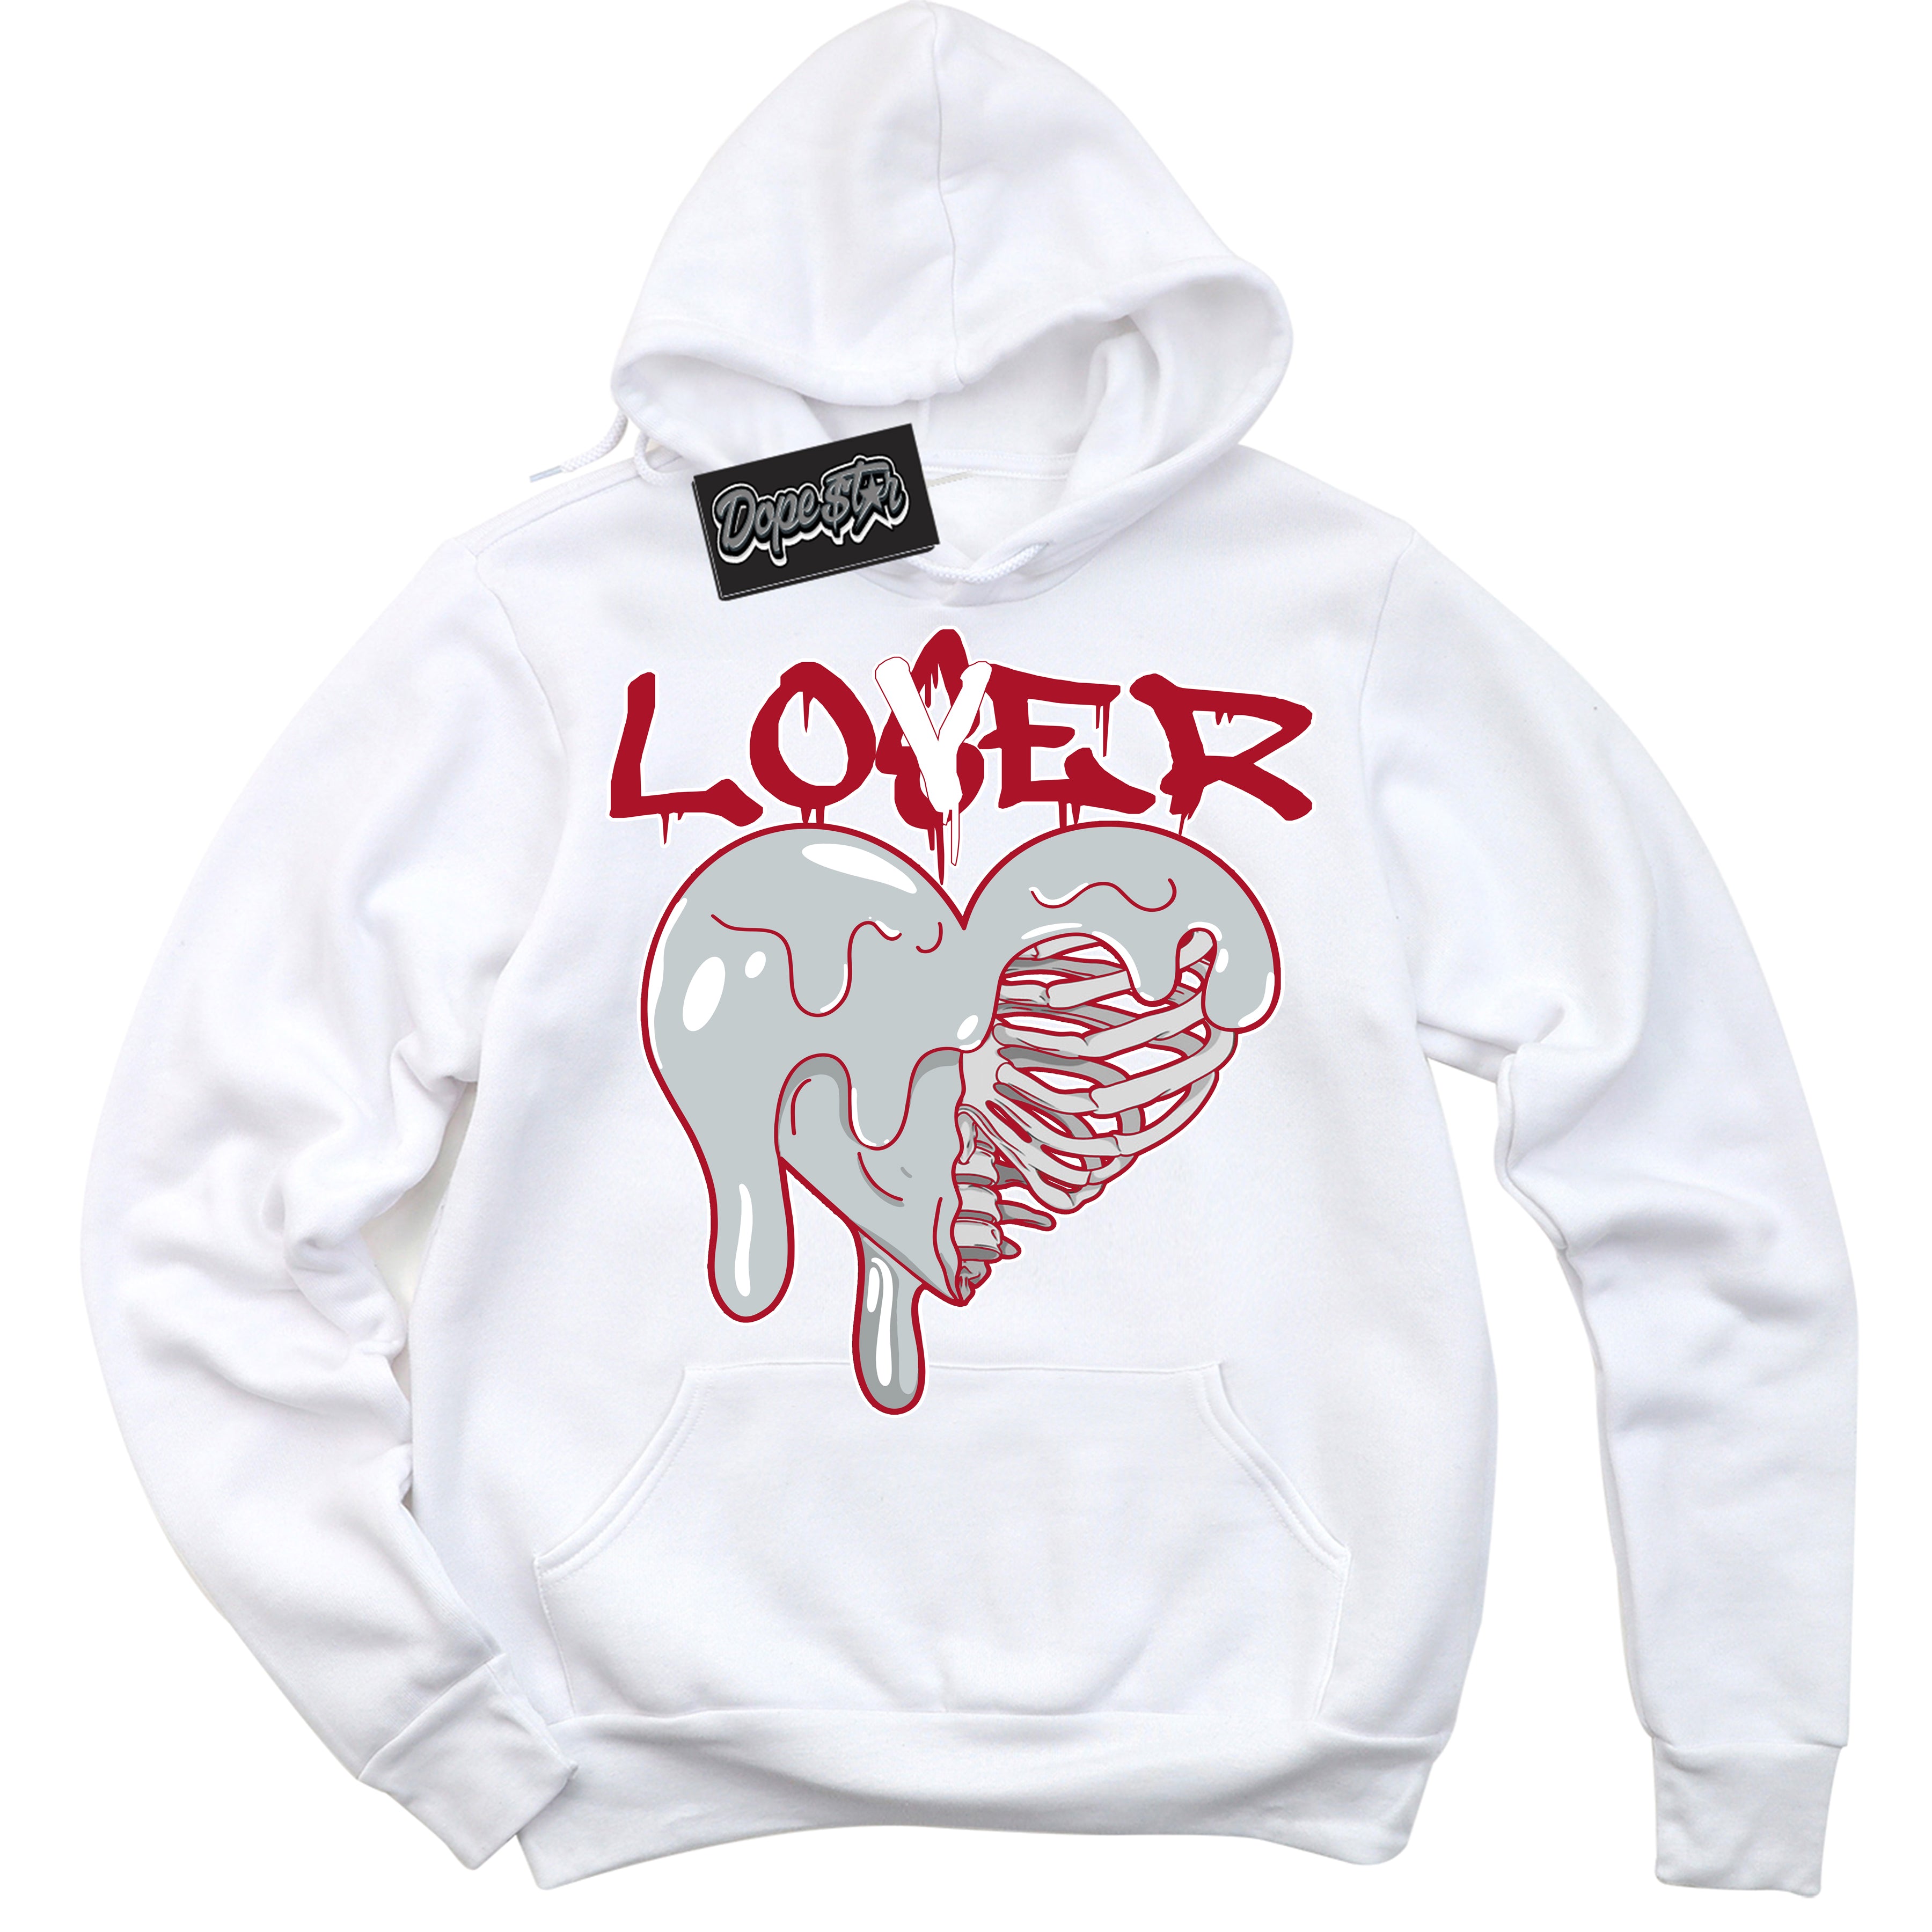 Cool White Hoodie with “ Lover Loser ”  design that Perfectly Matches  Reverse Ultraman Sneakers.